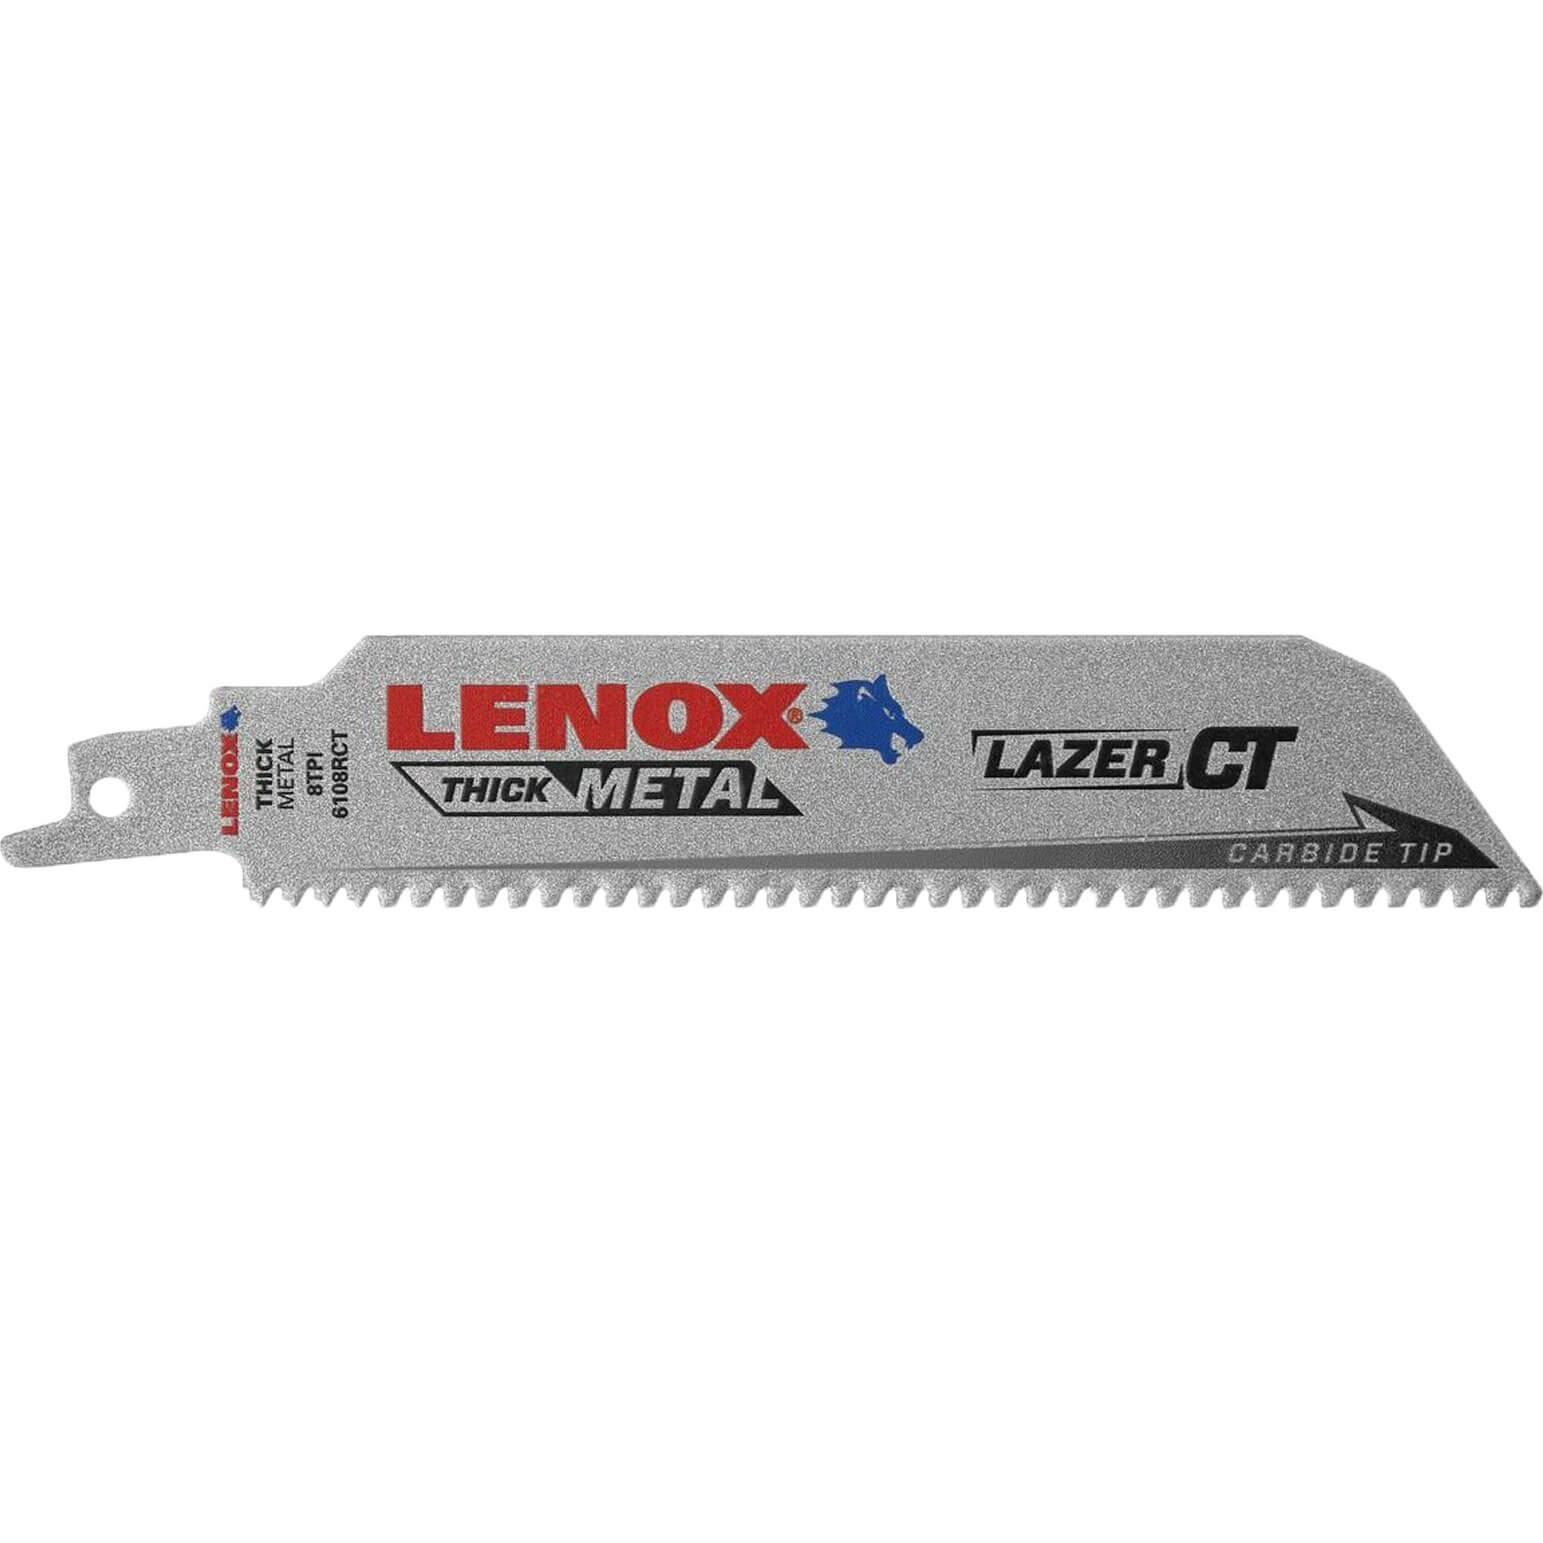 Image of Lenox Lazer CT Carbide Tipped Reciprocating Sabre Saw Blades 150mm Pack of 1